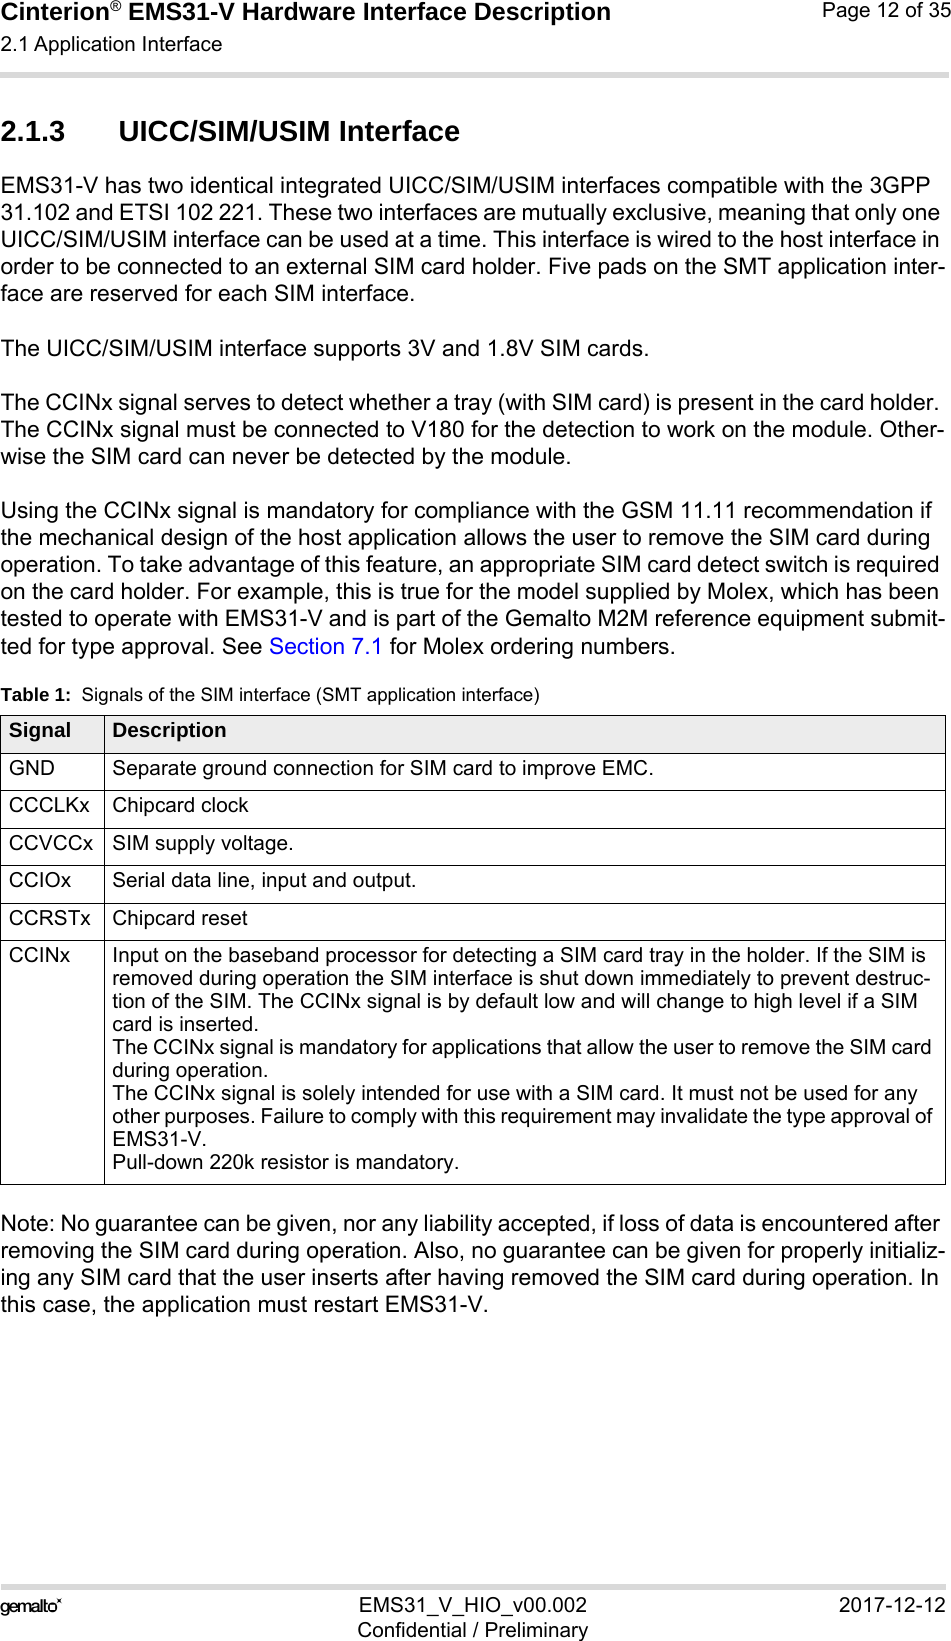 Cinterion® EMS31-V Hardware Interface Description2.1 Application Interface18EMS31_V_HIO_v00.002 2017-12-12Confidential / PreliminaryPage 12 of 352.1.3 UICC/SIM/USIM InterfaceEMS31-V has two identical integrated UICC/SIM/USIM interfaces compatible with the 3GPP 31.102 and ETSI 102 221. These two interfaces are mutually exclusive, meaning that only one UICC/SIM/USIM interface can be used at a time. This interface is wired to the host interface in order to be connected to an external SIM card holder. Five pads on the SMT application inter-face are reserved for each SIM interface.The UICC/SIM/USIM interface supports 3V and 1.8V SIM cards. The CCINx signal serves to detect whether a tray (with SIM card) is present in the card holder. The CCINx signal must be connected to V180 for the detection to work on the module. Other-wise the SIM card can never be detected by the module.Using the CCINx signal is mandatory for compliance with the GSM 11.11 recommendation if the mechanical design of the host application allows the user to remove the SIM card during operation. To take advantage of this feature, an appropriate SIM card detect switch is required on the card holder. For example, this is true for the model supplied by Molex, which has been tested to operate with EMS31-V and is part of the Gemalto M2M reference equipment submit-ted for type approval. See Section 7.1 for Molex ordering numbers.Note: No guarantee can be given, nor any liability accepted, if loss of data is encountered after removing the SIM card during operation. Also, no guarantee can be given for properly initializ-ing any SIM card that the user inserts after having removed the SIM card during operation. In this case, the application must restart EMS31-V.Table 1:  Signals of the SIM interface (SMT application interface)Signal DescriptionGND Separate ground connection for SIM card to improve EMC.CCCLKx Chipcard clockCCVCCx SIM supply voltage.CCIOx Serial data line, input and output.CCRSTx Chipcard resetCCINx Input on the baseband processor for detecting a SIM card tray in the holder. If the SIM is removed during operation the SIM interface is shut down immediately to prevent destruc-tion of the SIM. The CCINx signal is by default low and will change to high level if a SIM card is inserted.The CCINx signal is mandatory for applications that allow the user to remove the SIM card during operation. The CCINx signal is solely intended for use with a SIM card. It must not be used for any other purposes. Failure to comply with this requirement may invalidate the type approval of EMS31-V.Pull-down 220k resistor is mandatory.